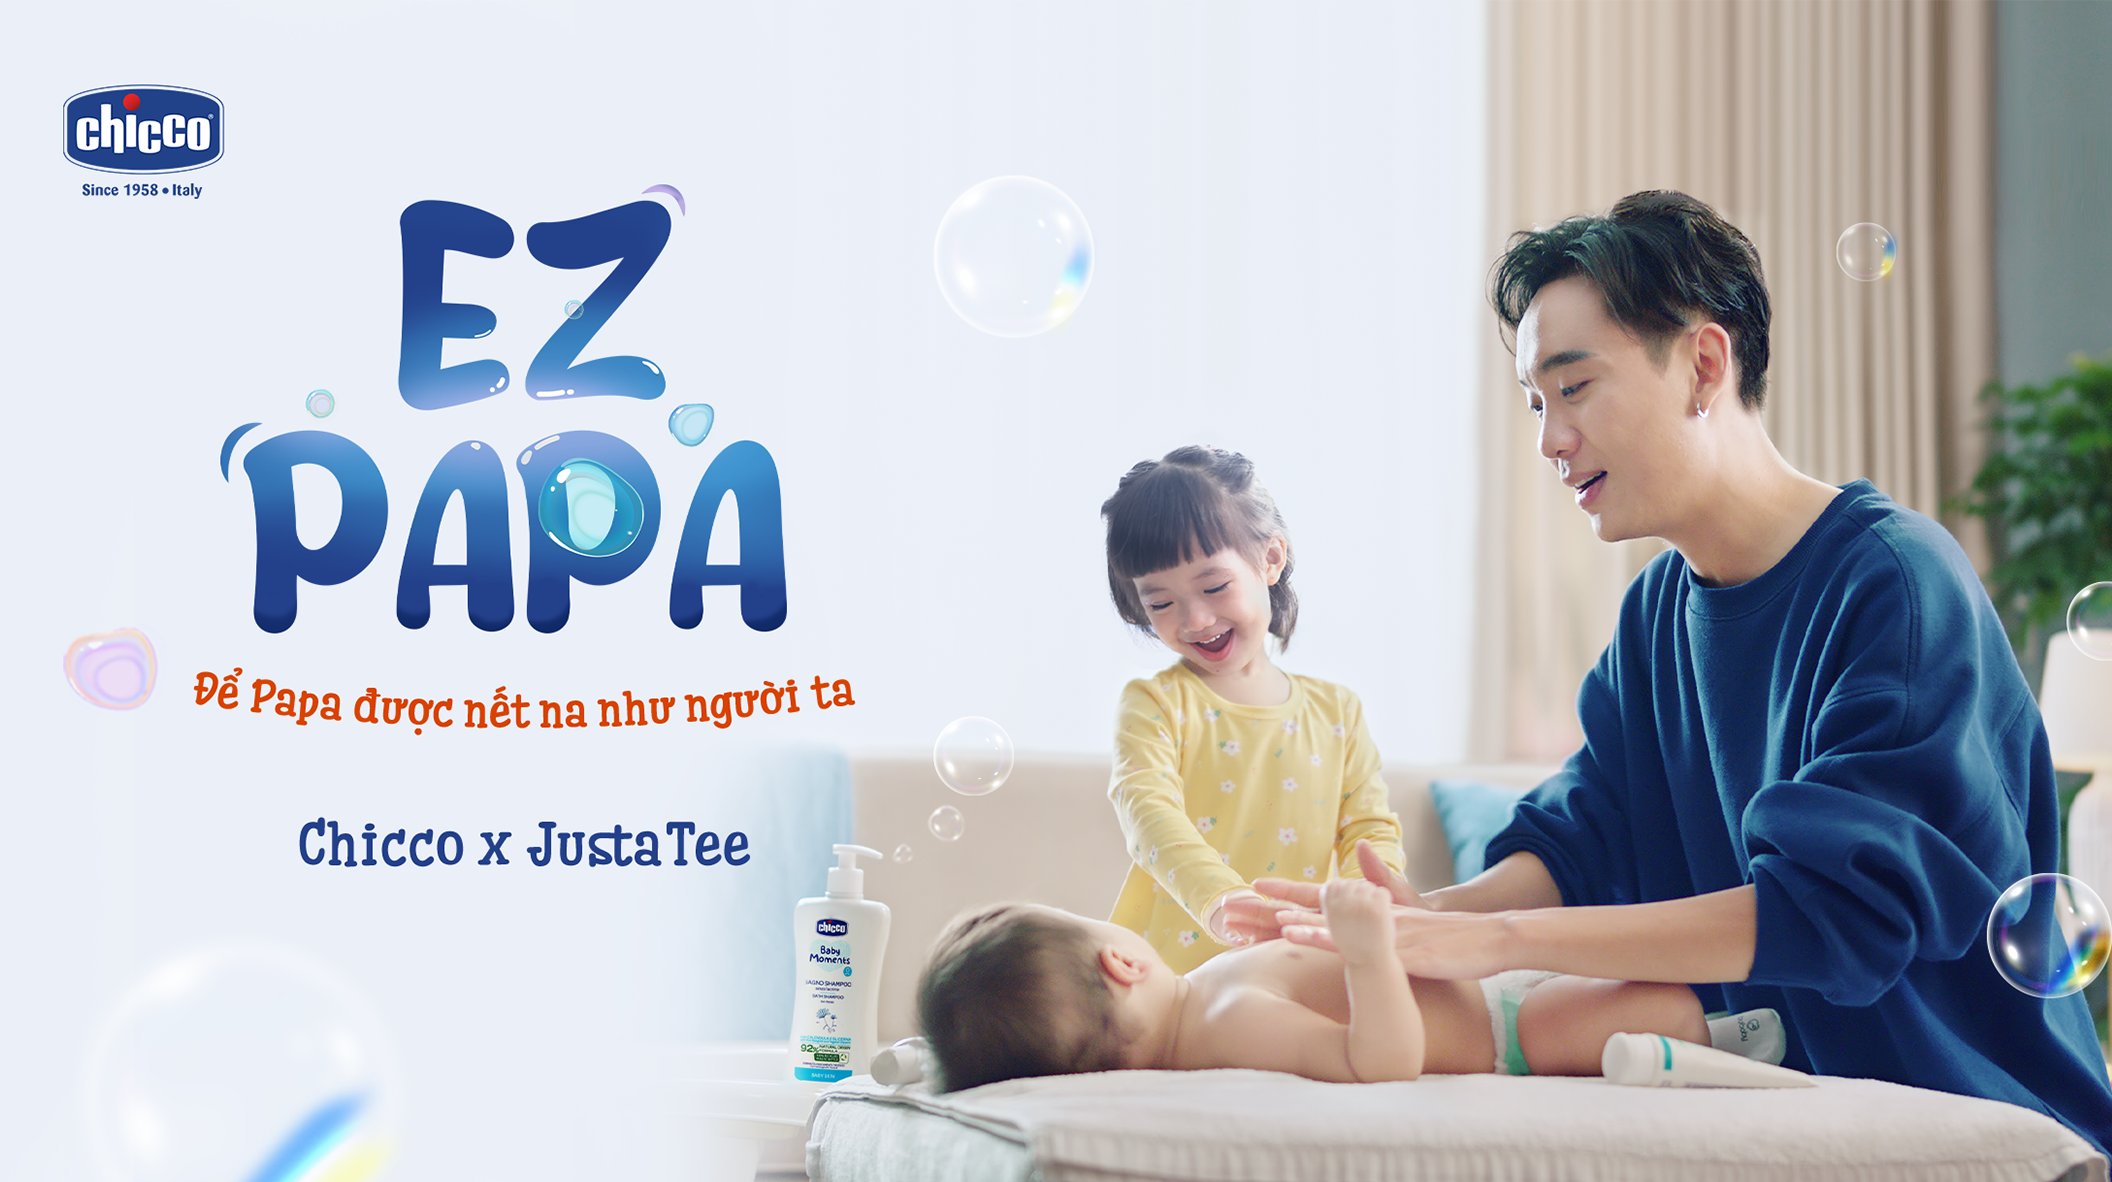 EZ Papa – A new outlook on the role of a dad